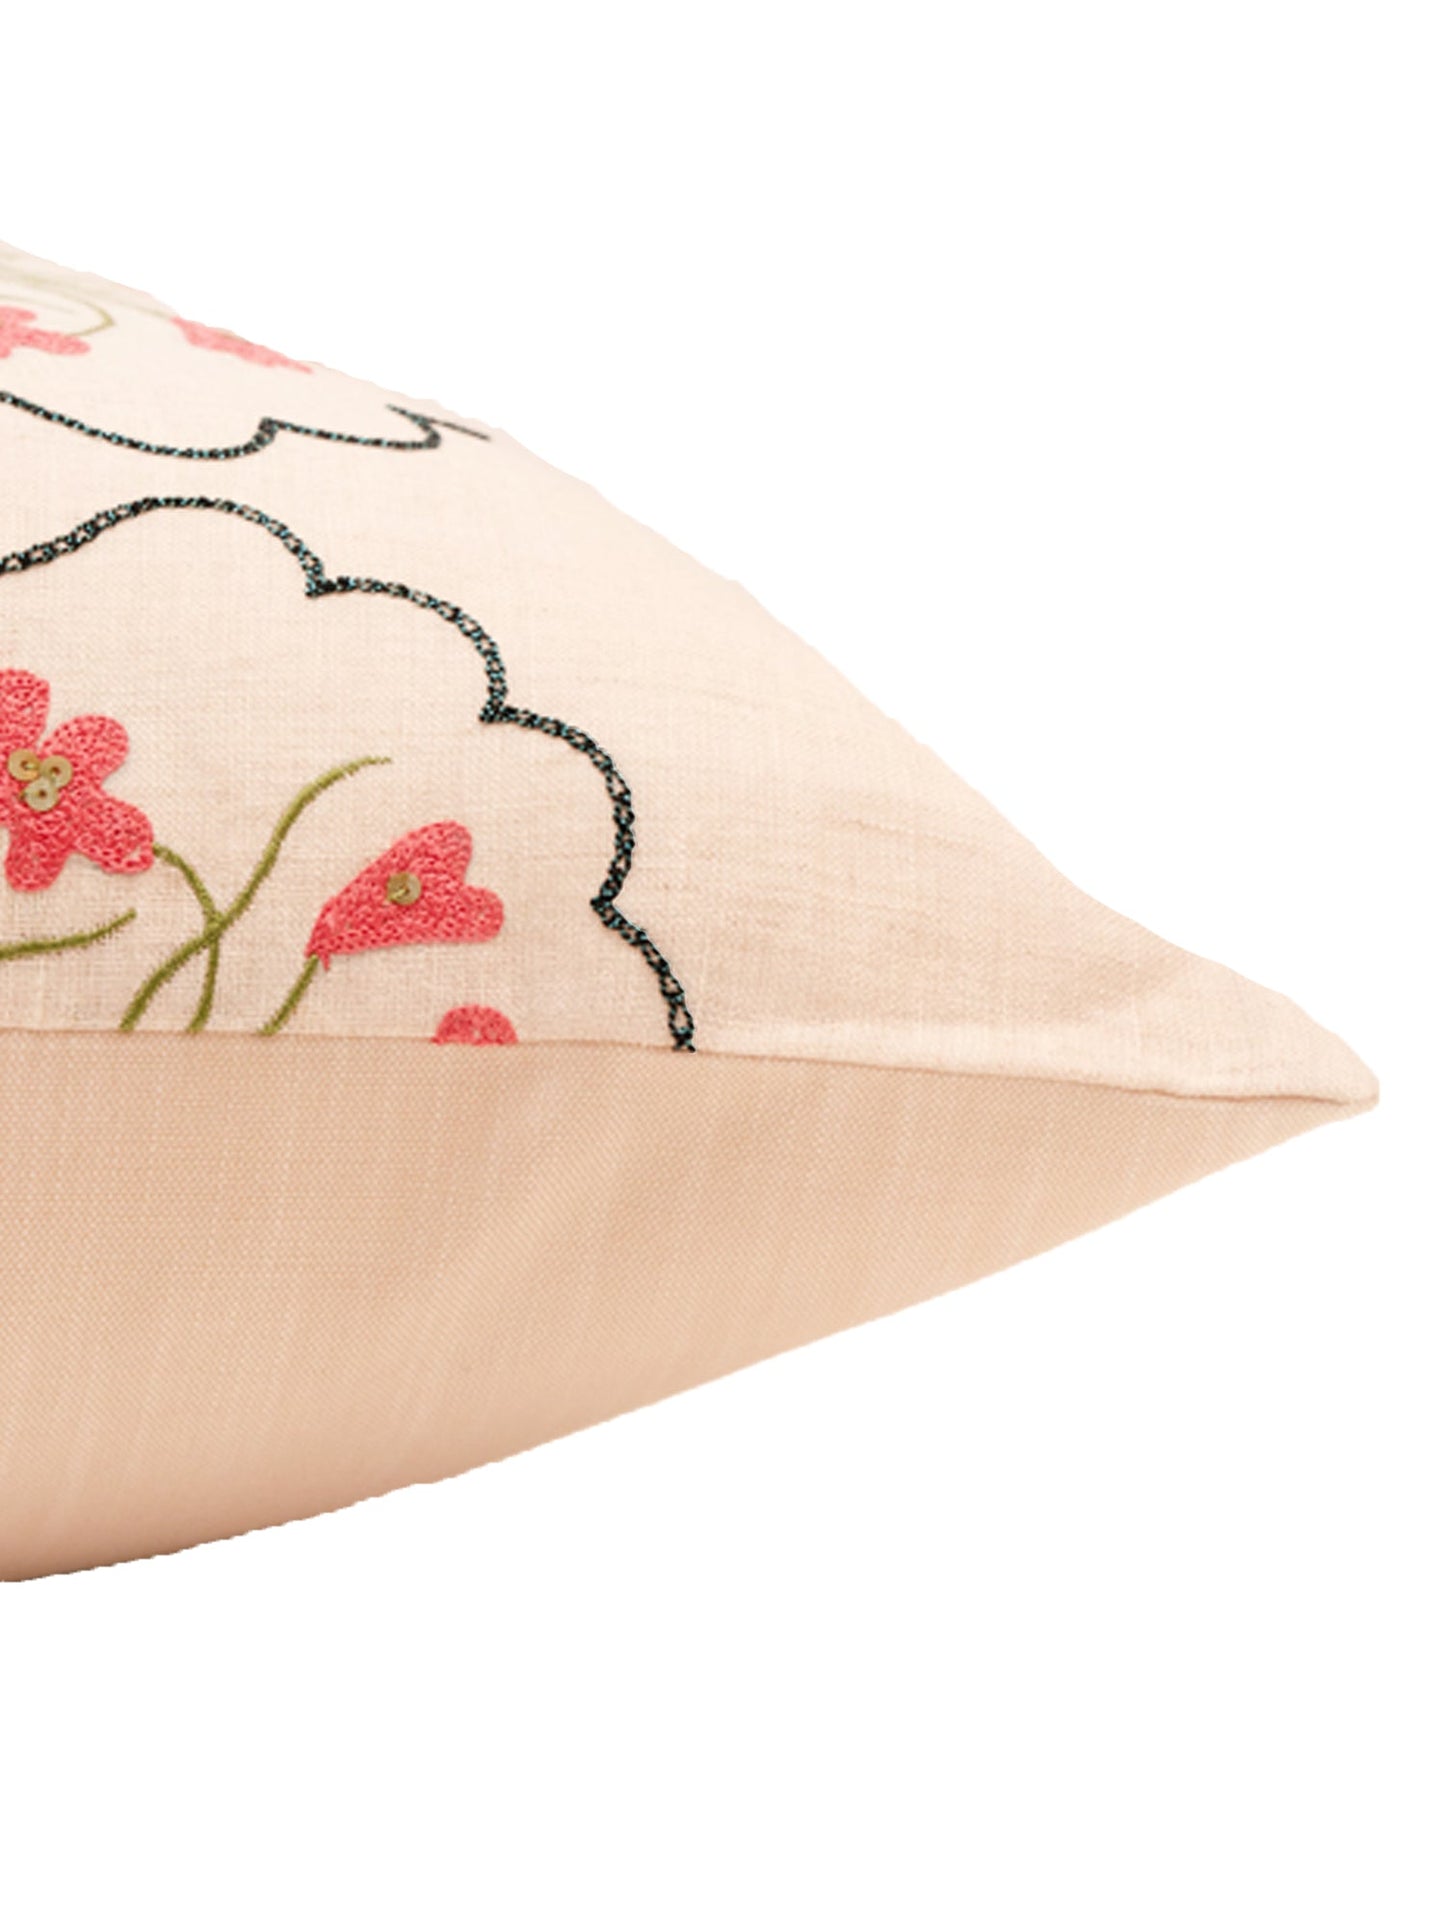 Cushion Cover Linen Silk Patchwork with Embroidery Off White - 20" X 20"